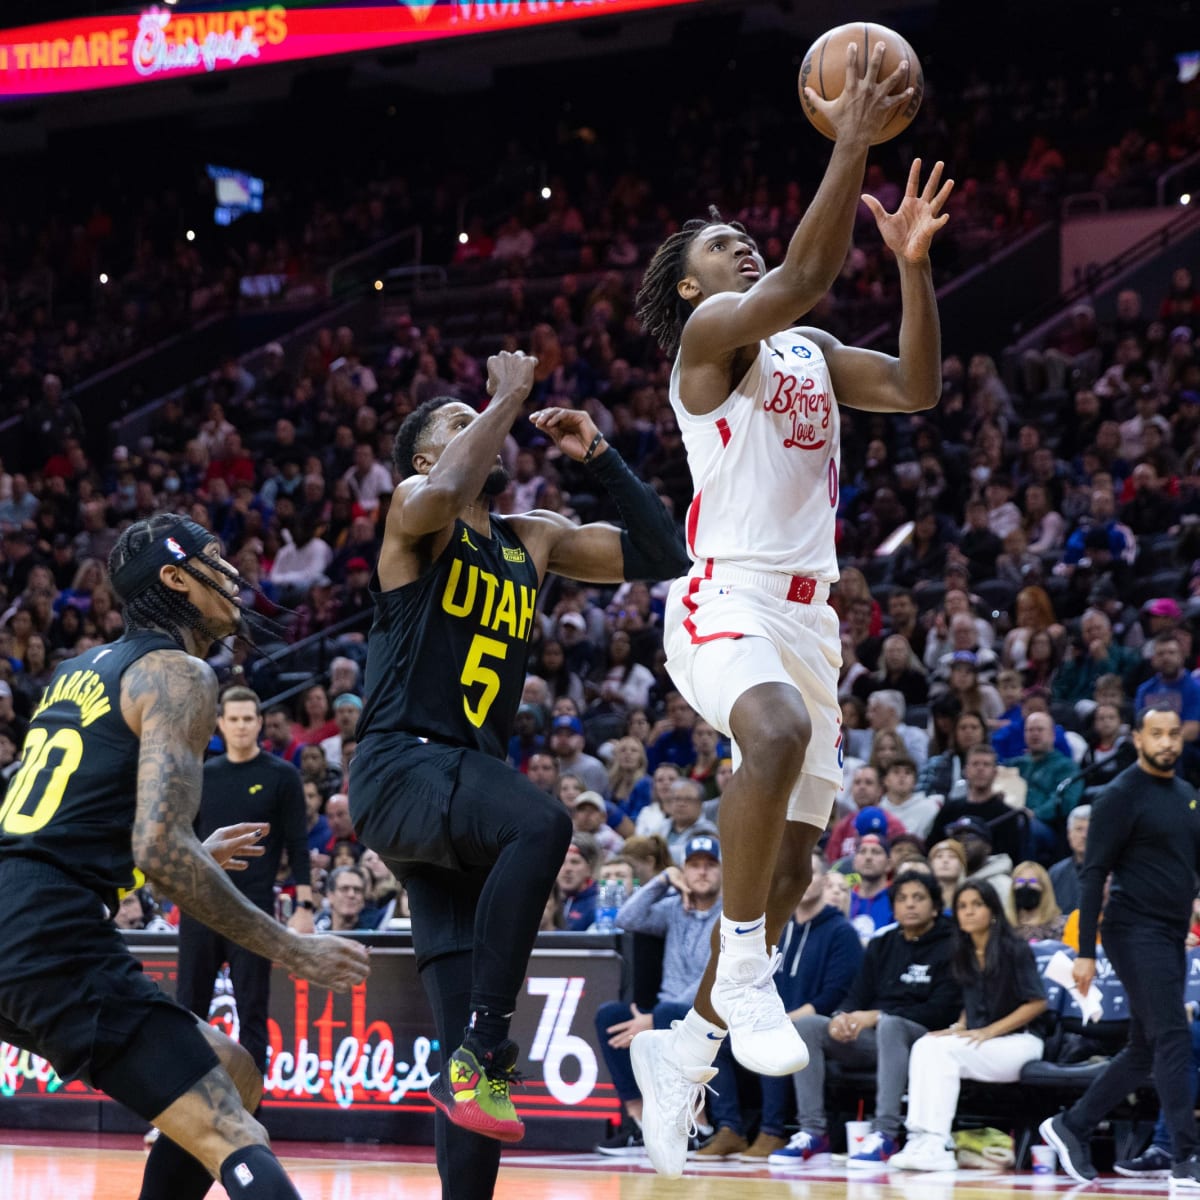 Tyrese Maxey joins Sixers PGL to talk about his injury, 2022